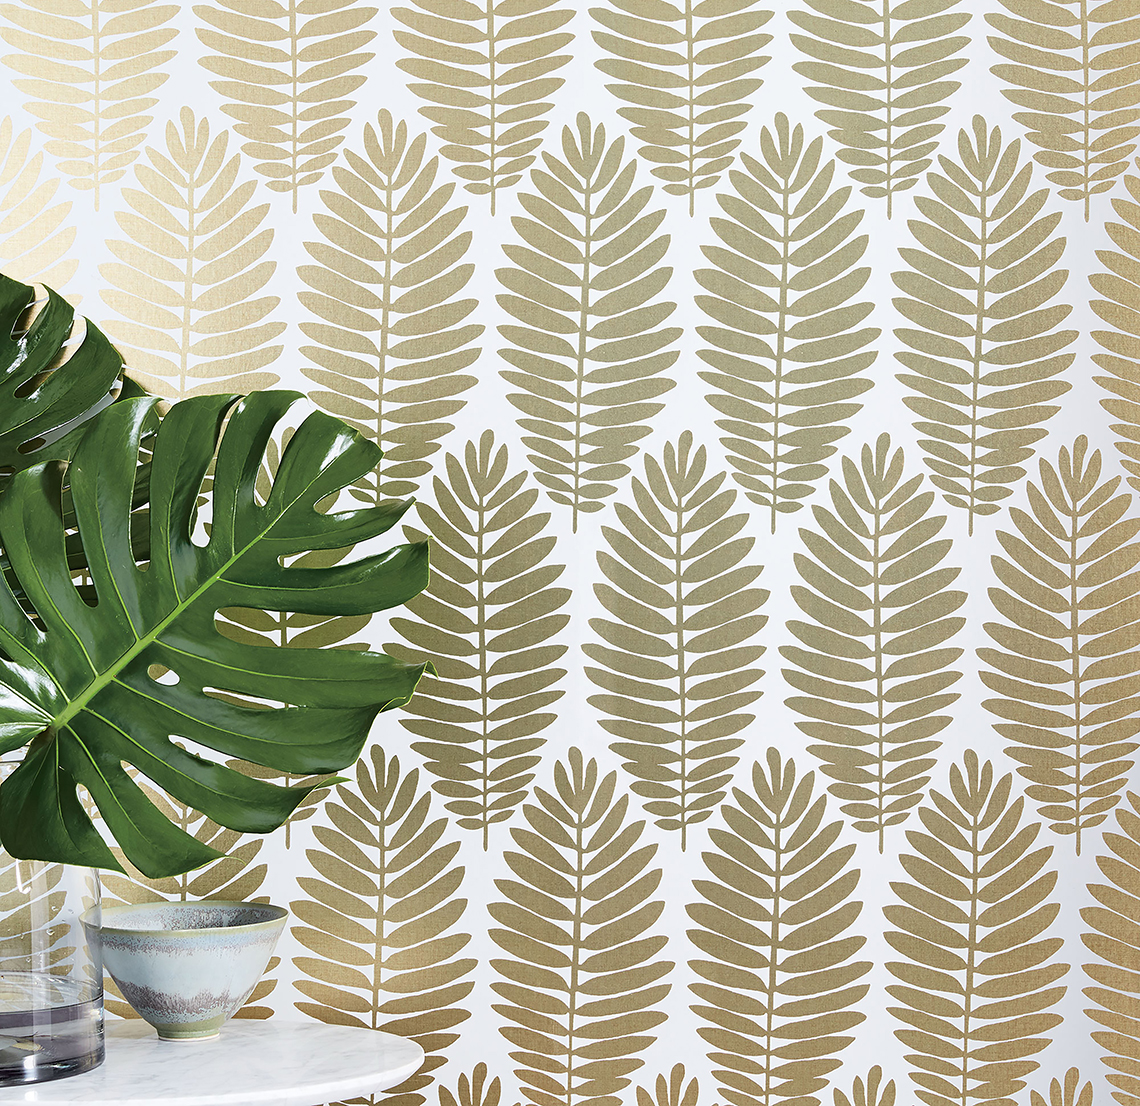 How To Update Wallpaper And Make It Look Trendy